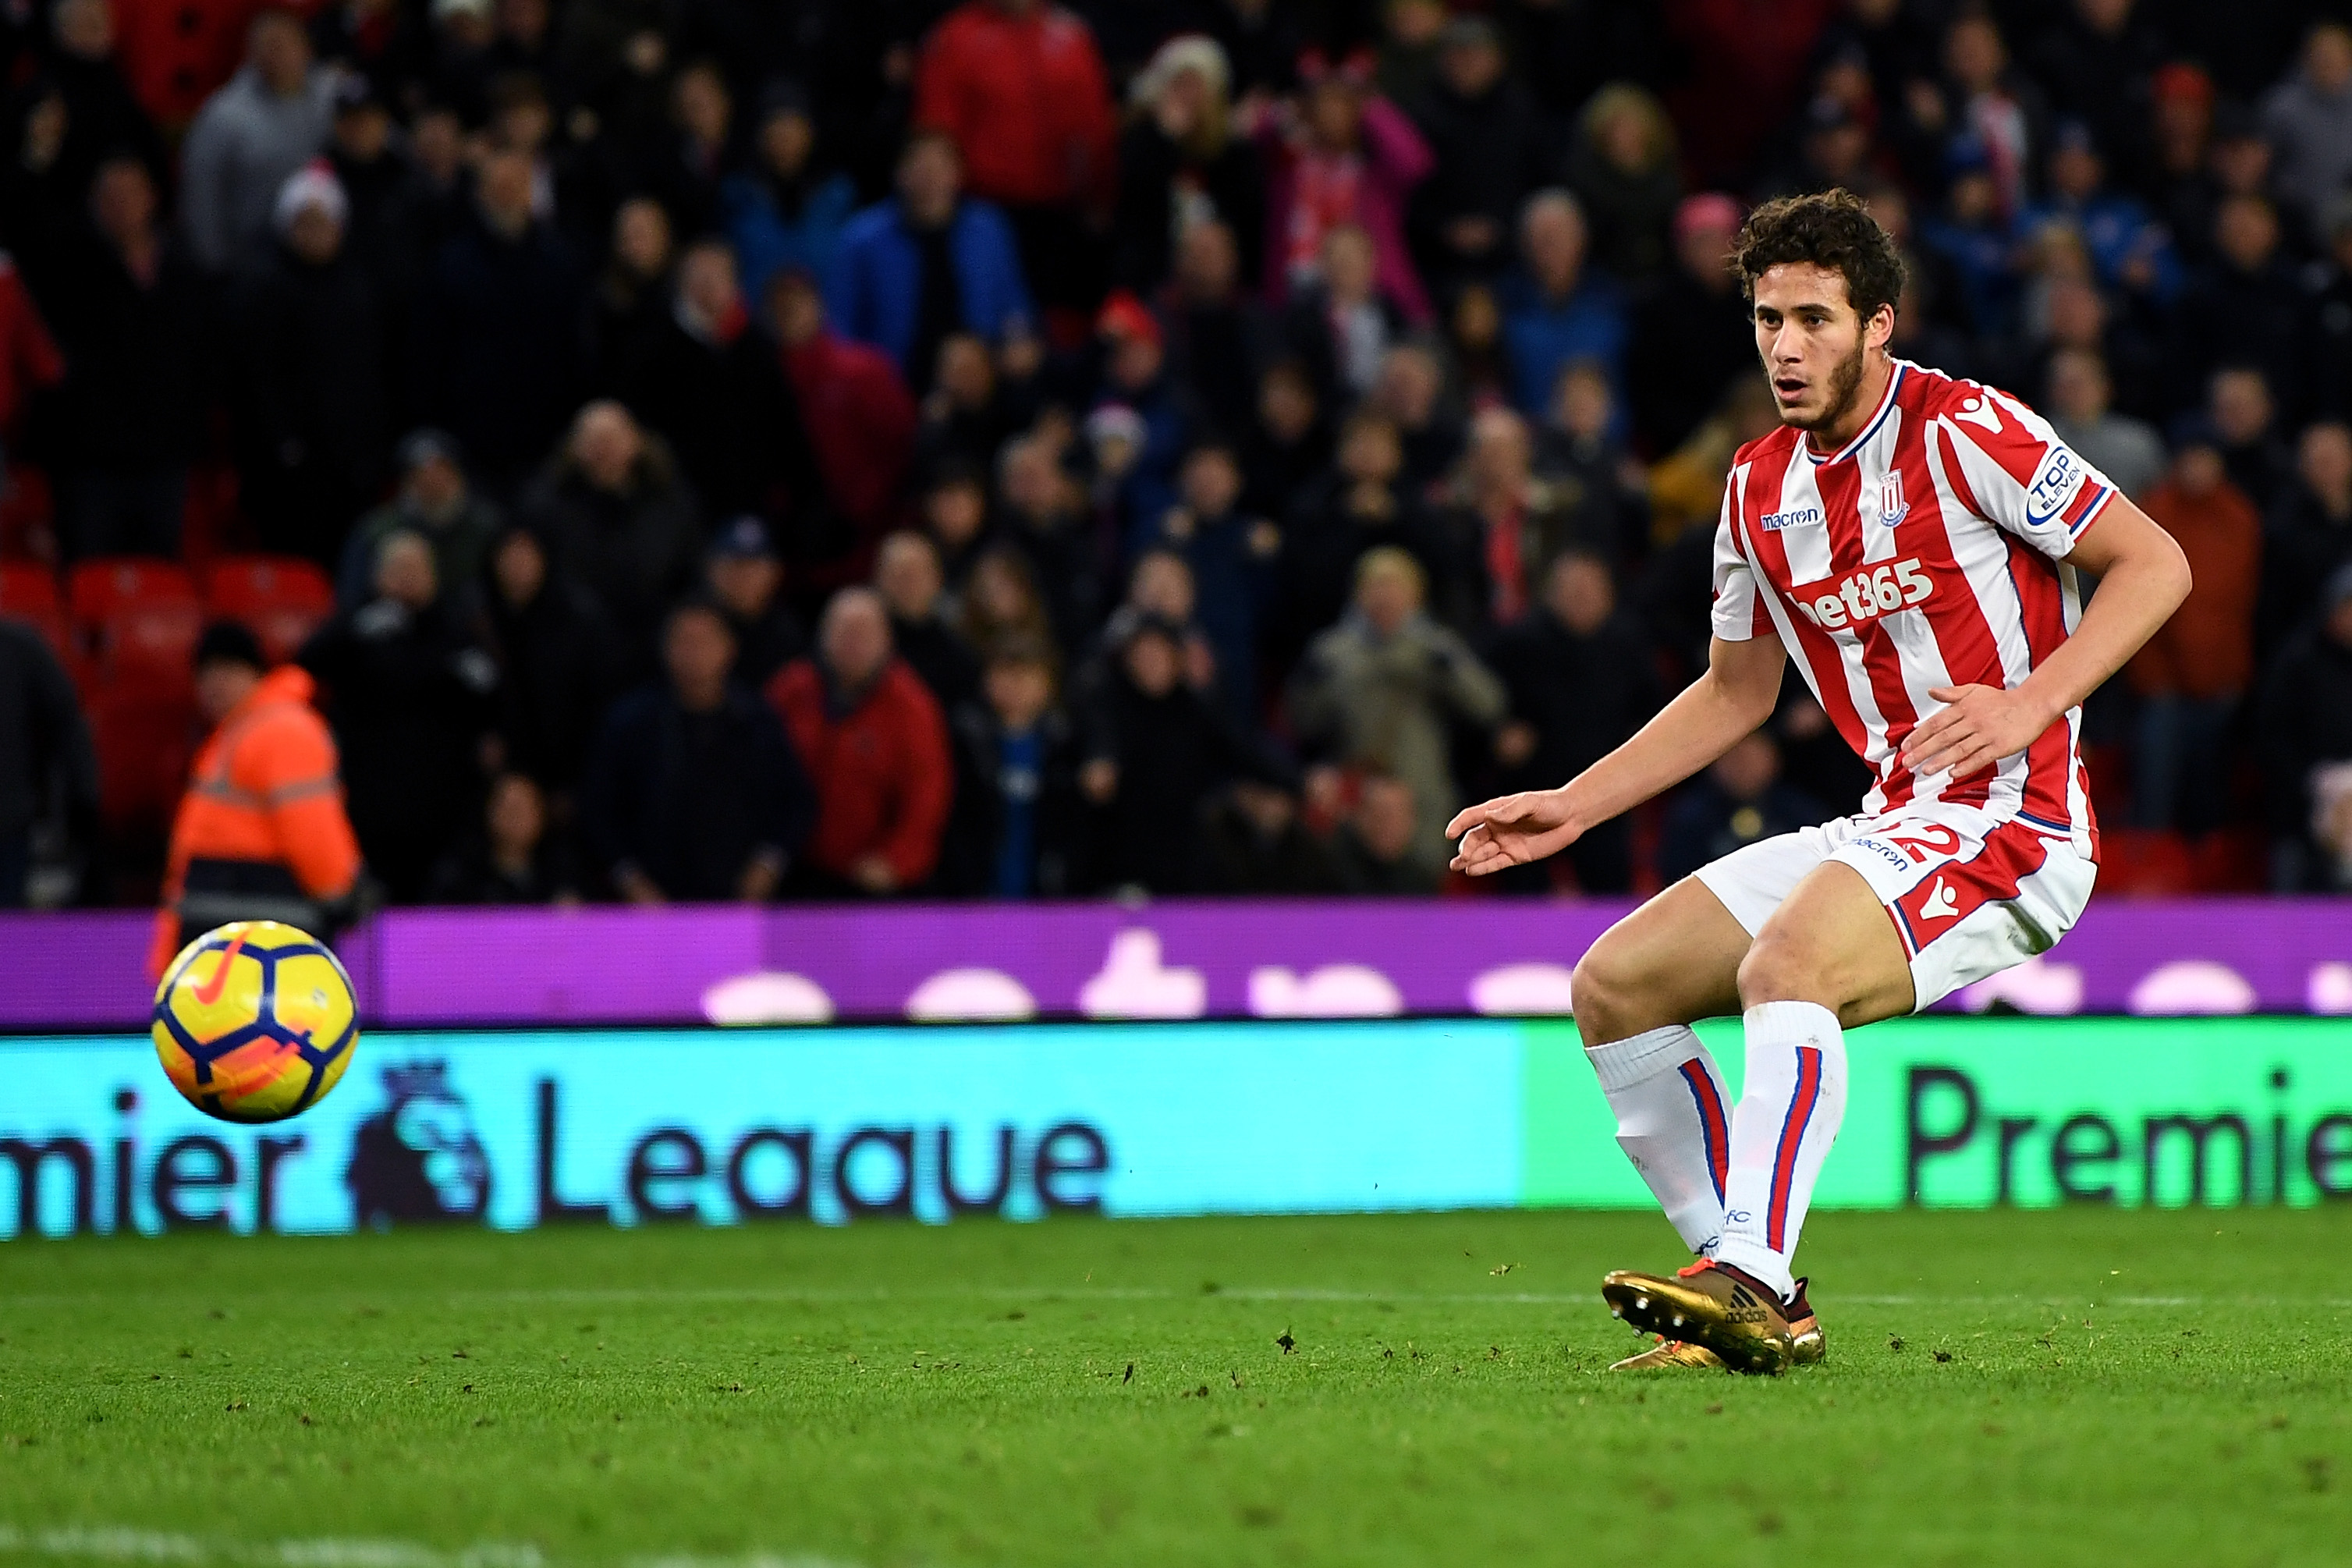 STOKE ON TRENT, ENGLAND - DECEMBER 23: Ramadan Sobhi of Stoke City scores his sides third goal during the Premier League match between Stoke City and West Bromwich Albion at Bet365 Stadium on December 23, 2017 in Stoke on Trent, England.  (Photo by Gareth Copley/Getty Images)